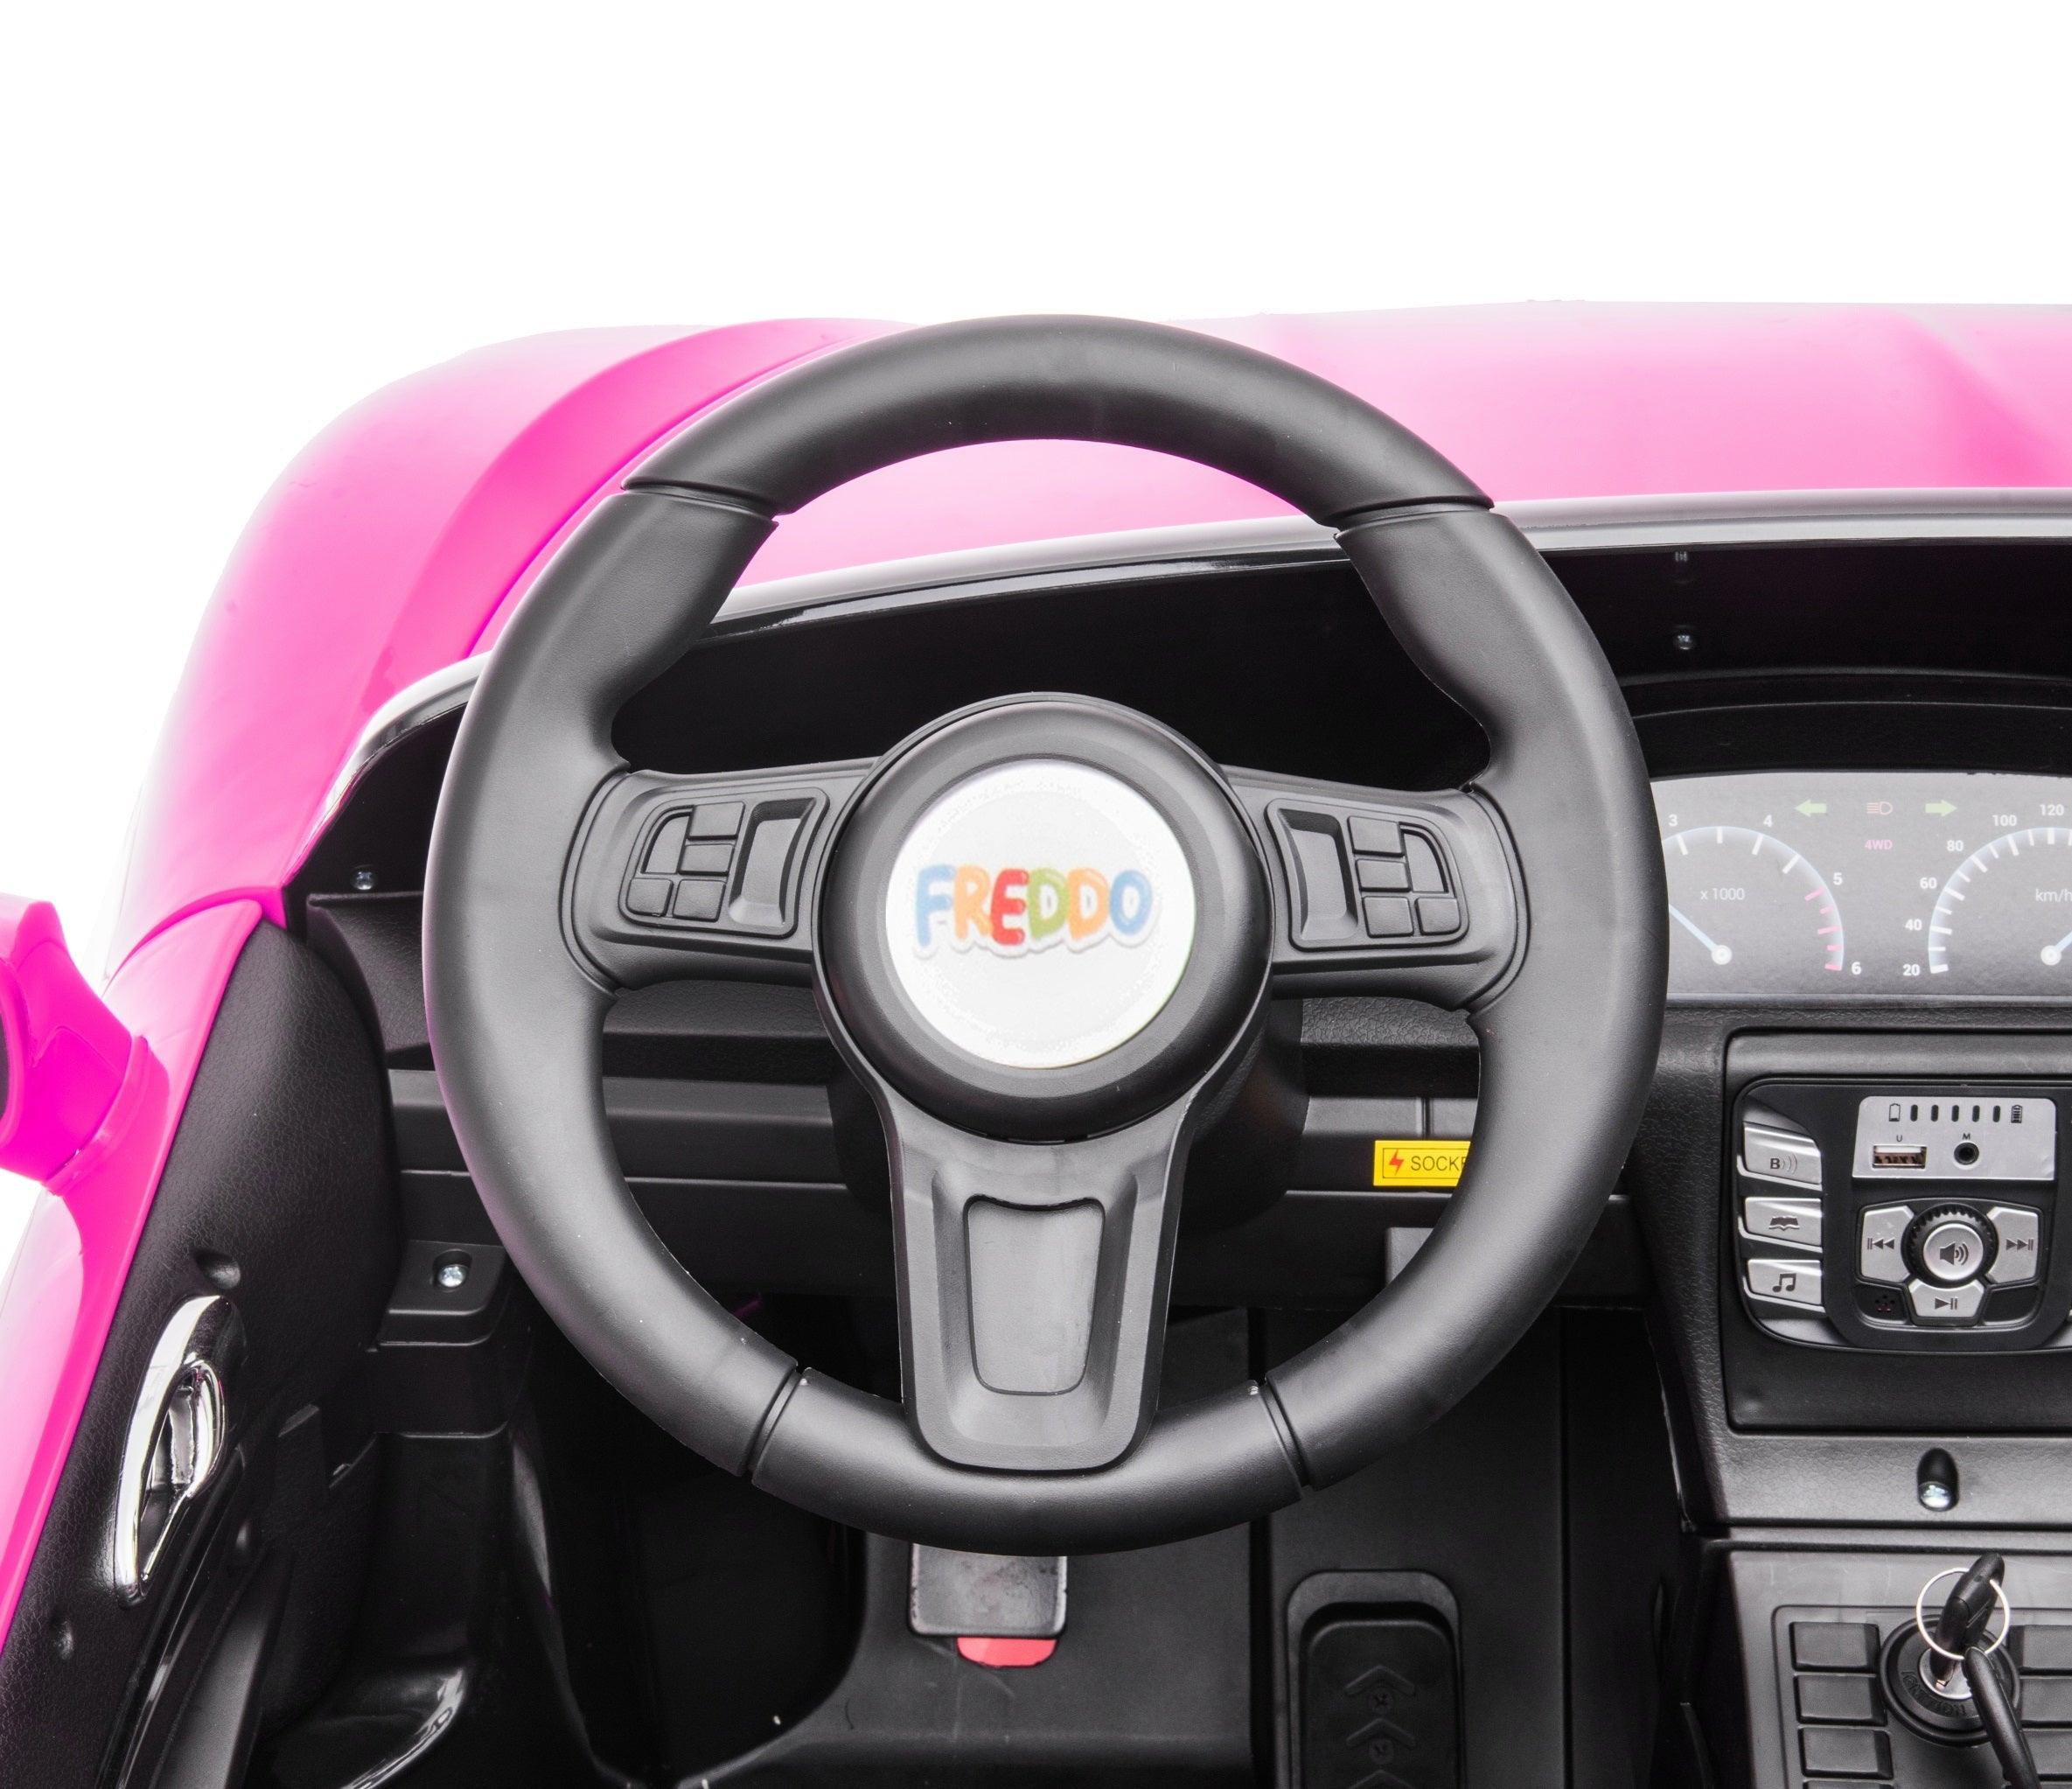 Compatible Steering Wheel for Ride on Cars - DTI Direct Canada